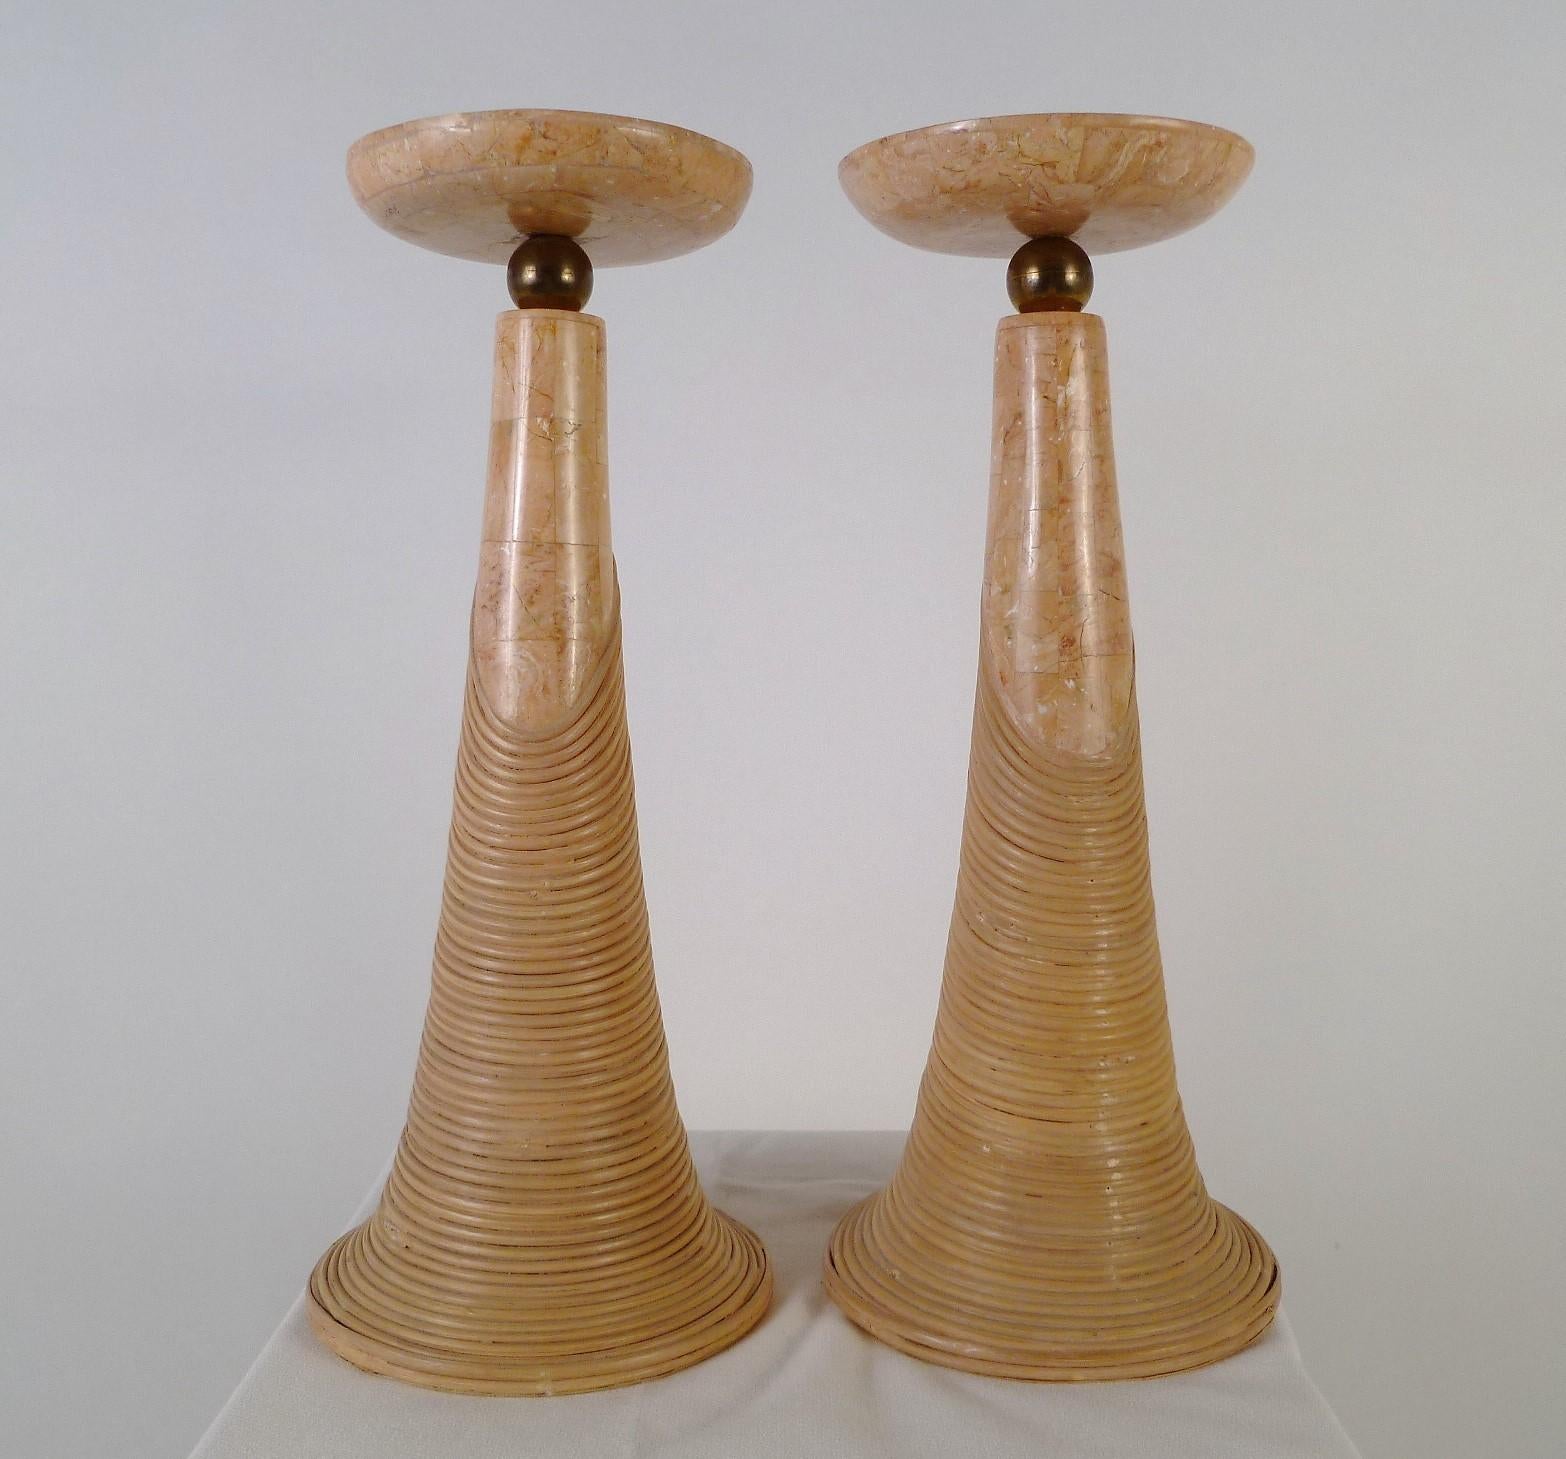 Organic Modern Karl Springer Style Pair Tessellated Marble, Brass and Cane Candleholders 1970s For Sale